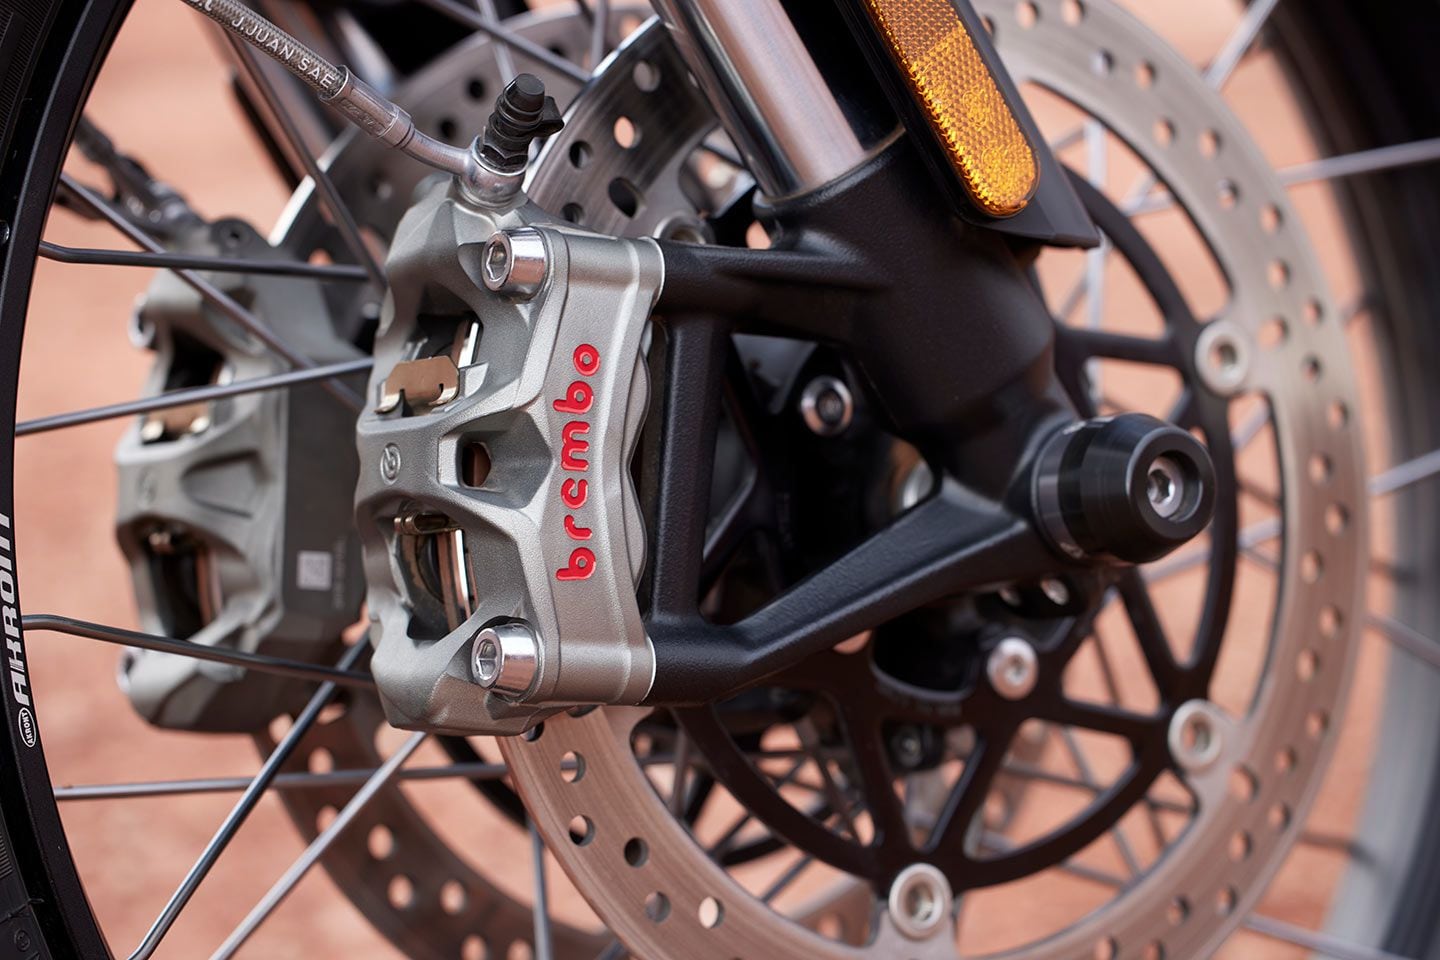 The updated XE gets new Brembo Stylema front brake calipers in place of the X model’s Nissin units.